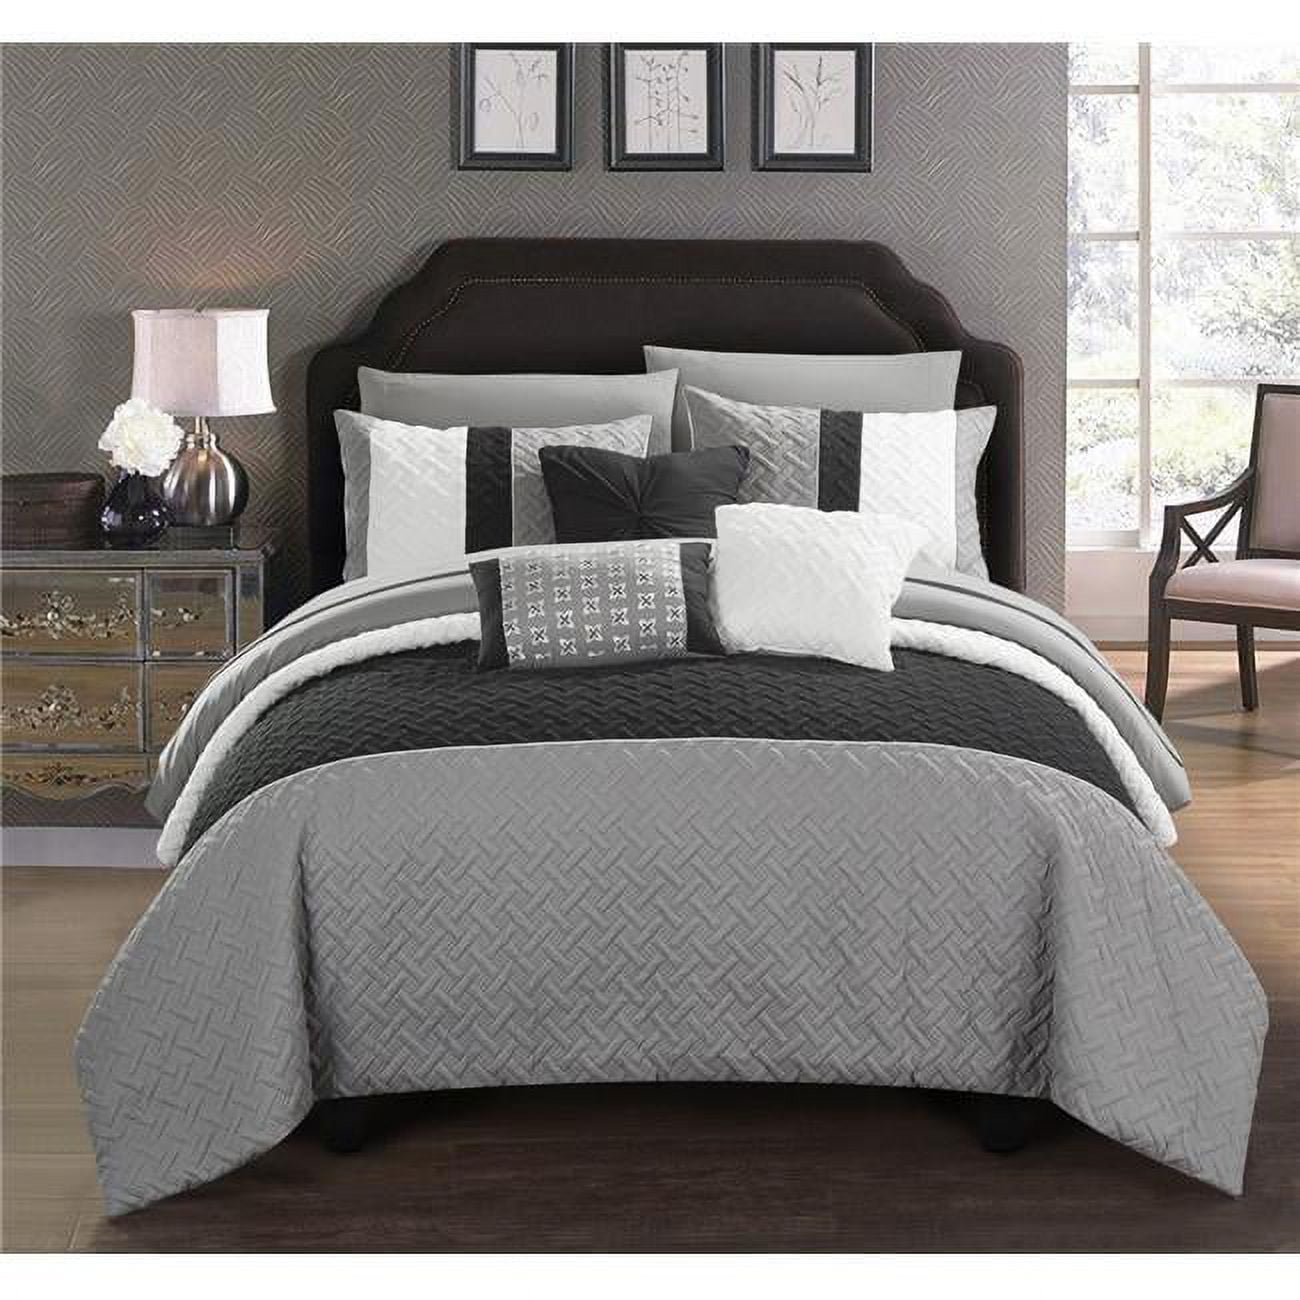 Bcs10032-us Twin Size Lior Comforter Set Color Block Quilted Embroidered Design Bed Sheets & Decorative Pillows, Grey - 8 Piece